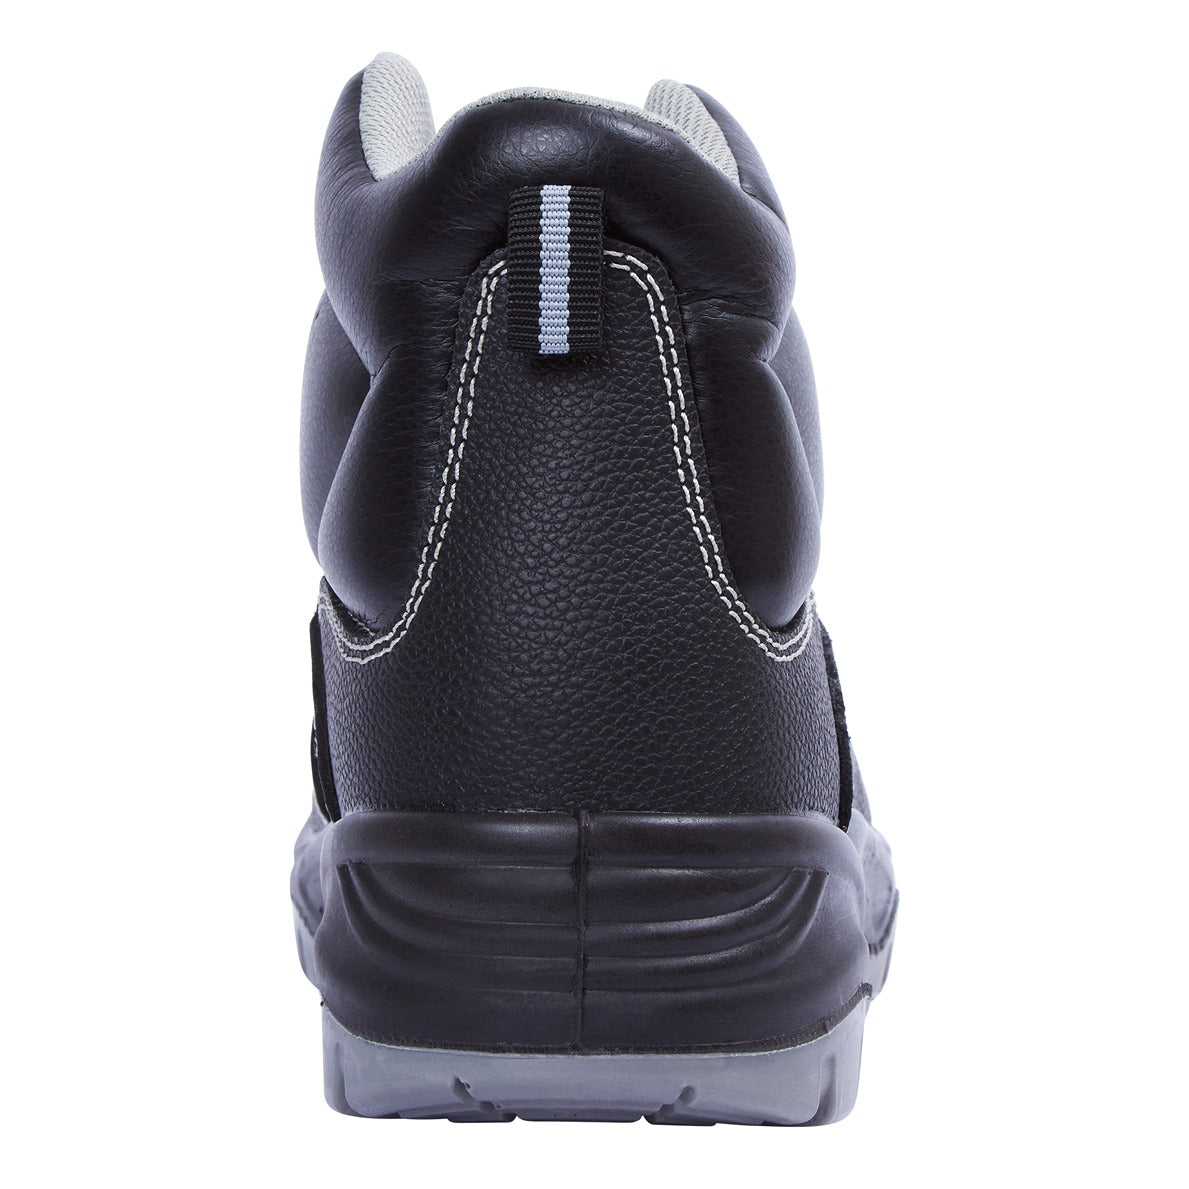 Work Site Ss609Sm Black All Terrain Safety Boot 3